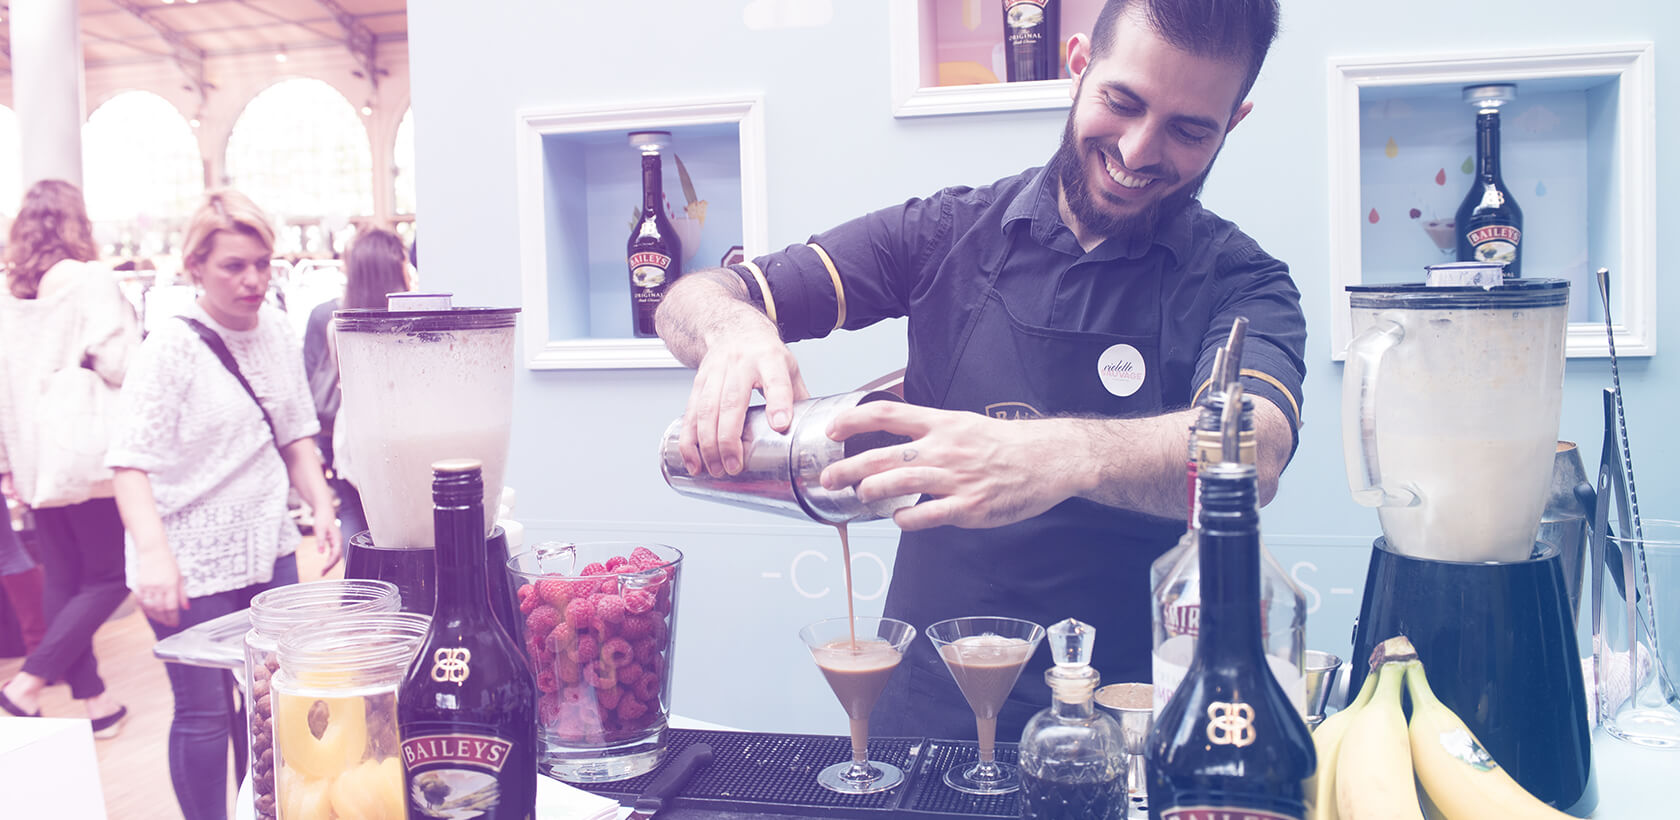 Baileys experiential marketing activation by Globe